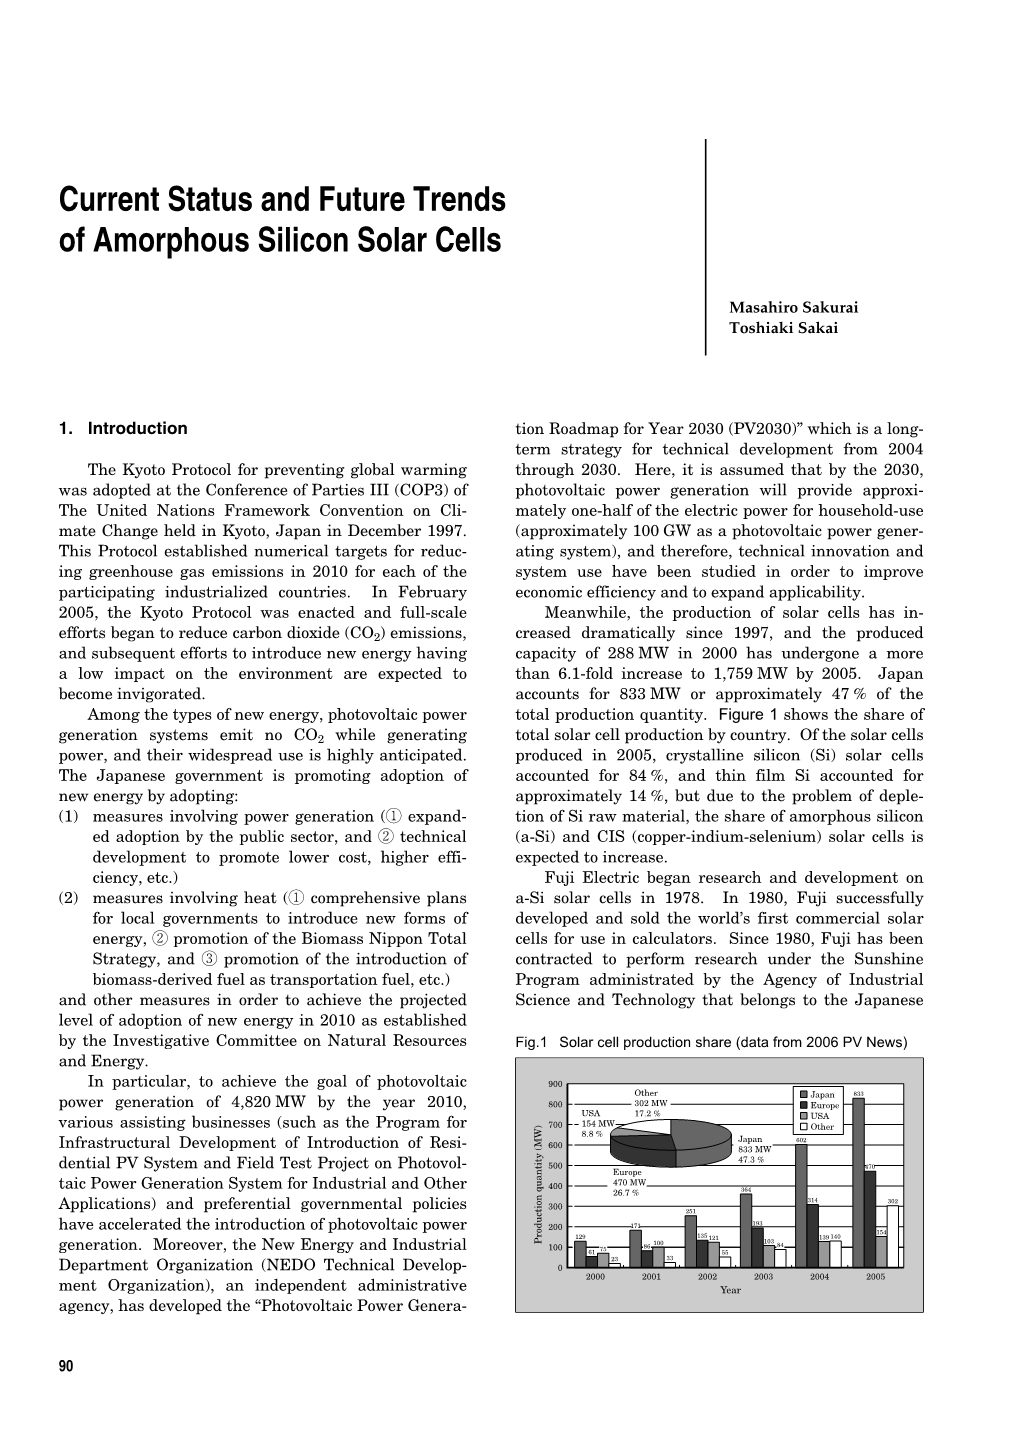 Current Status and Future Trends of Amorphous Silicon Solar Cells